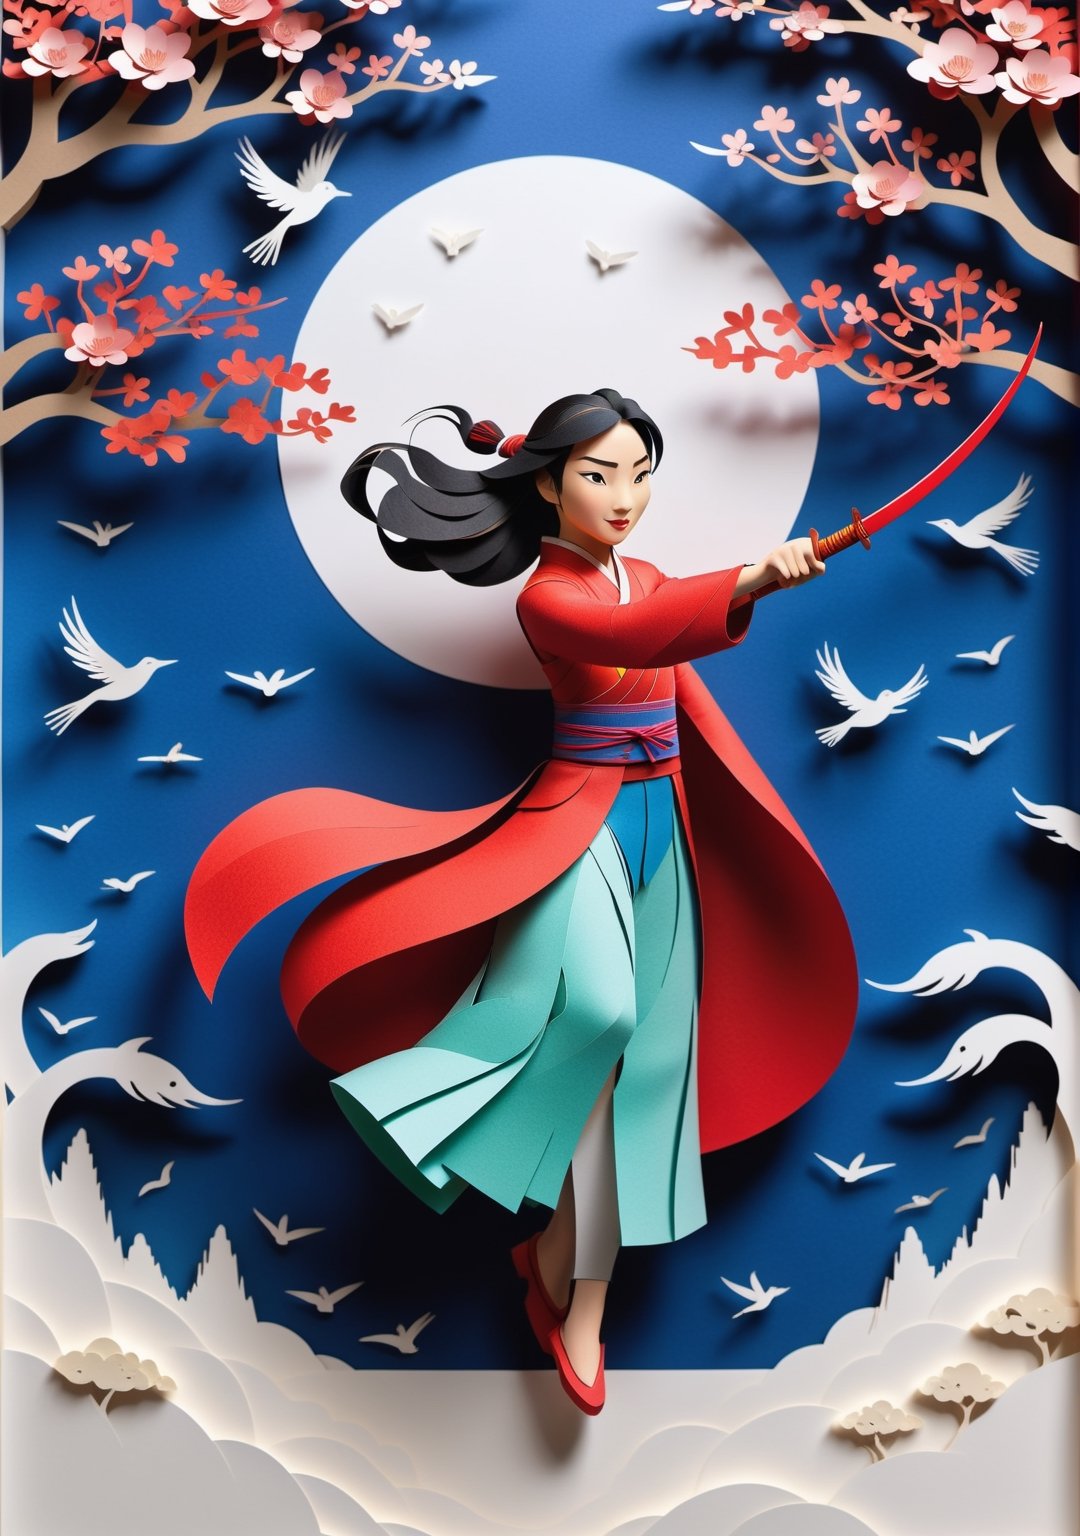 A mesmerizing paper-cut animation of the iconic tale of Mulan comes to life on the screen. Every delicate detail meticulously crafted out of paper unfolds before your eyes, showcasing the determined spirit of Mulan. The intricate paper scenes blend vibrant colors with the ancient art of papercutting, capturing Mulan's courage and determination as she goes against societal expectations to protect her family and honor. This enchanting animation captivates viewers with its exquisite precision and awe-inspiring artistry, immersing them in the compelling story of Mulan's heroic journey. (((Paper cutting art style))), high detail, high quality, high resolution, dramatically captivating, detailmaster2,Movie Still